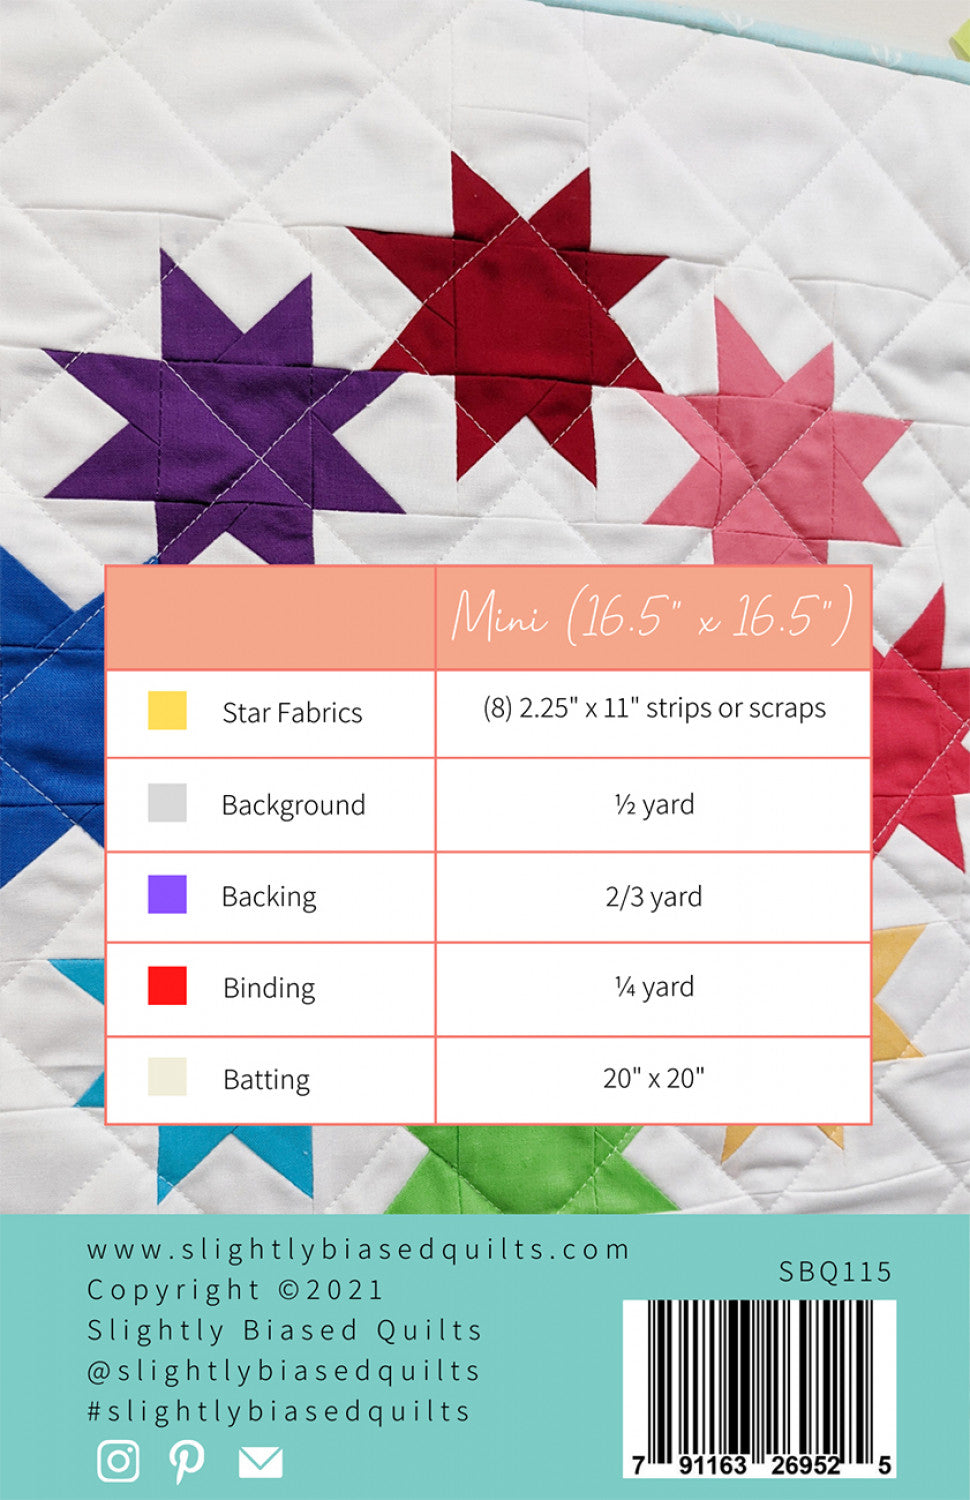 Vela Mini Quilt Pattern by Slightly Biased Quilts